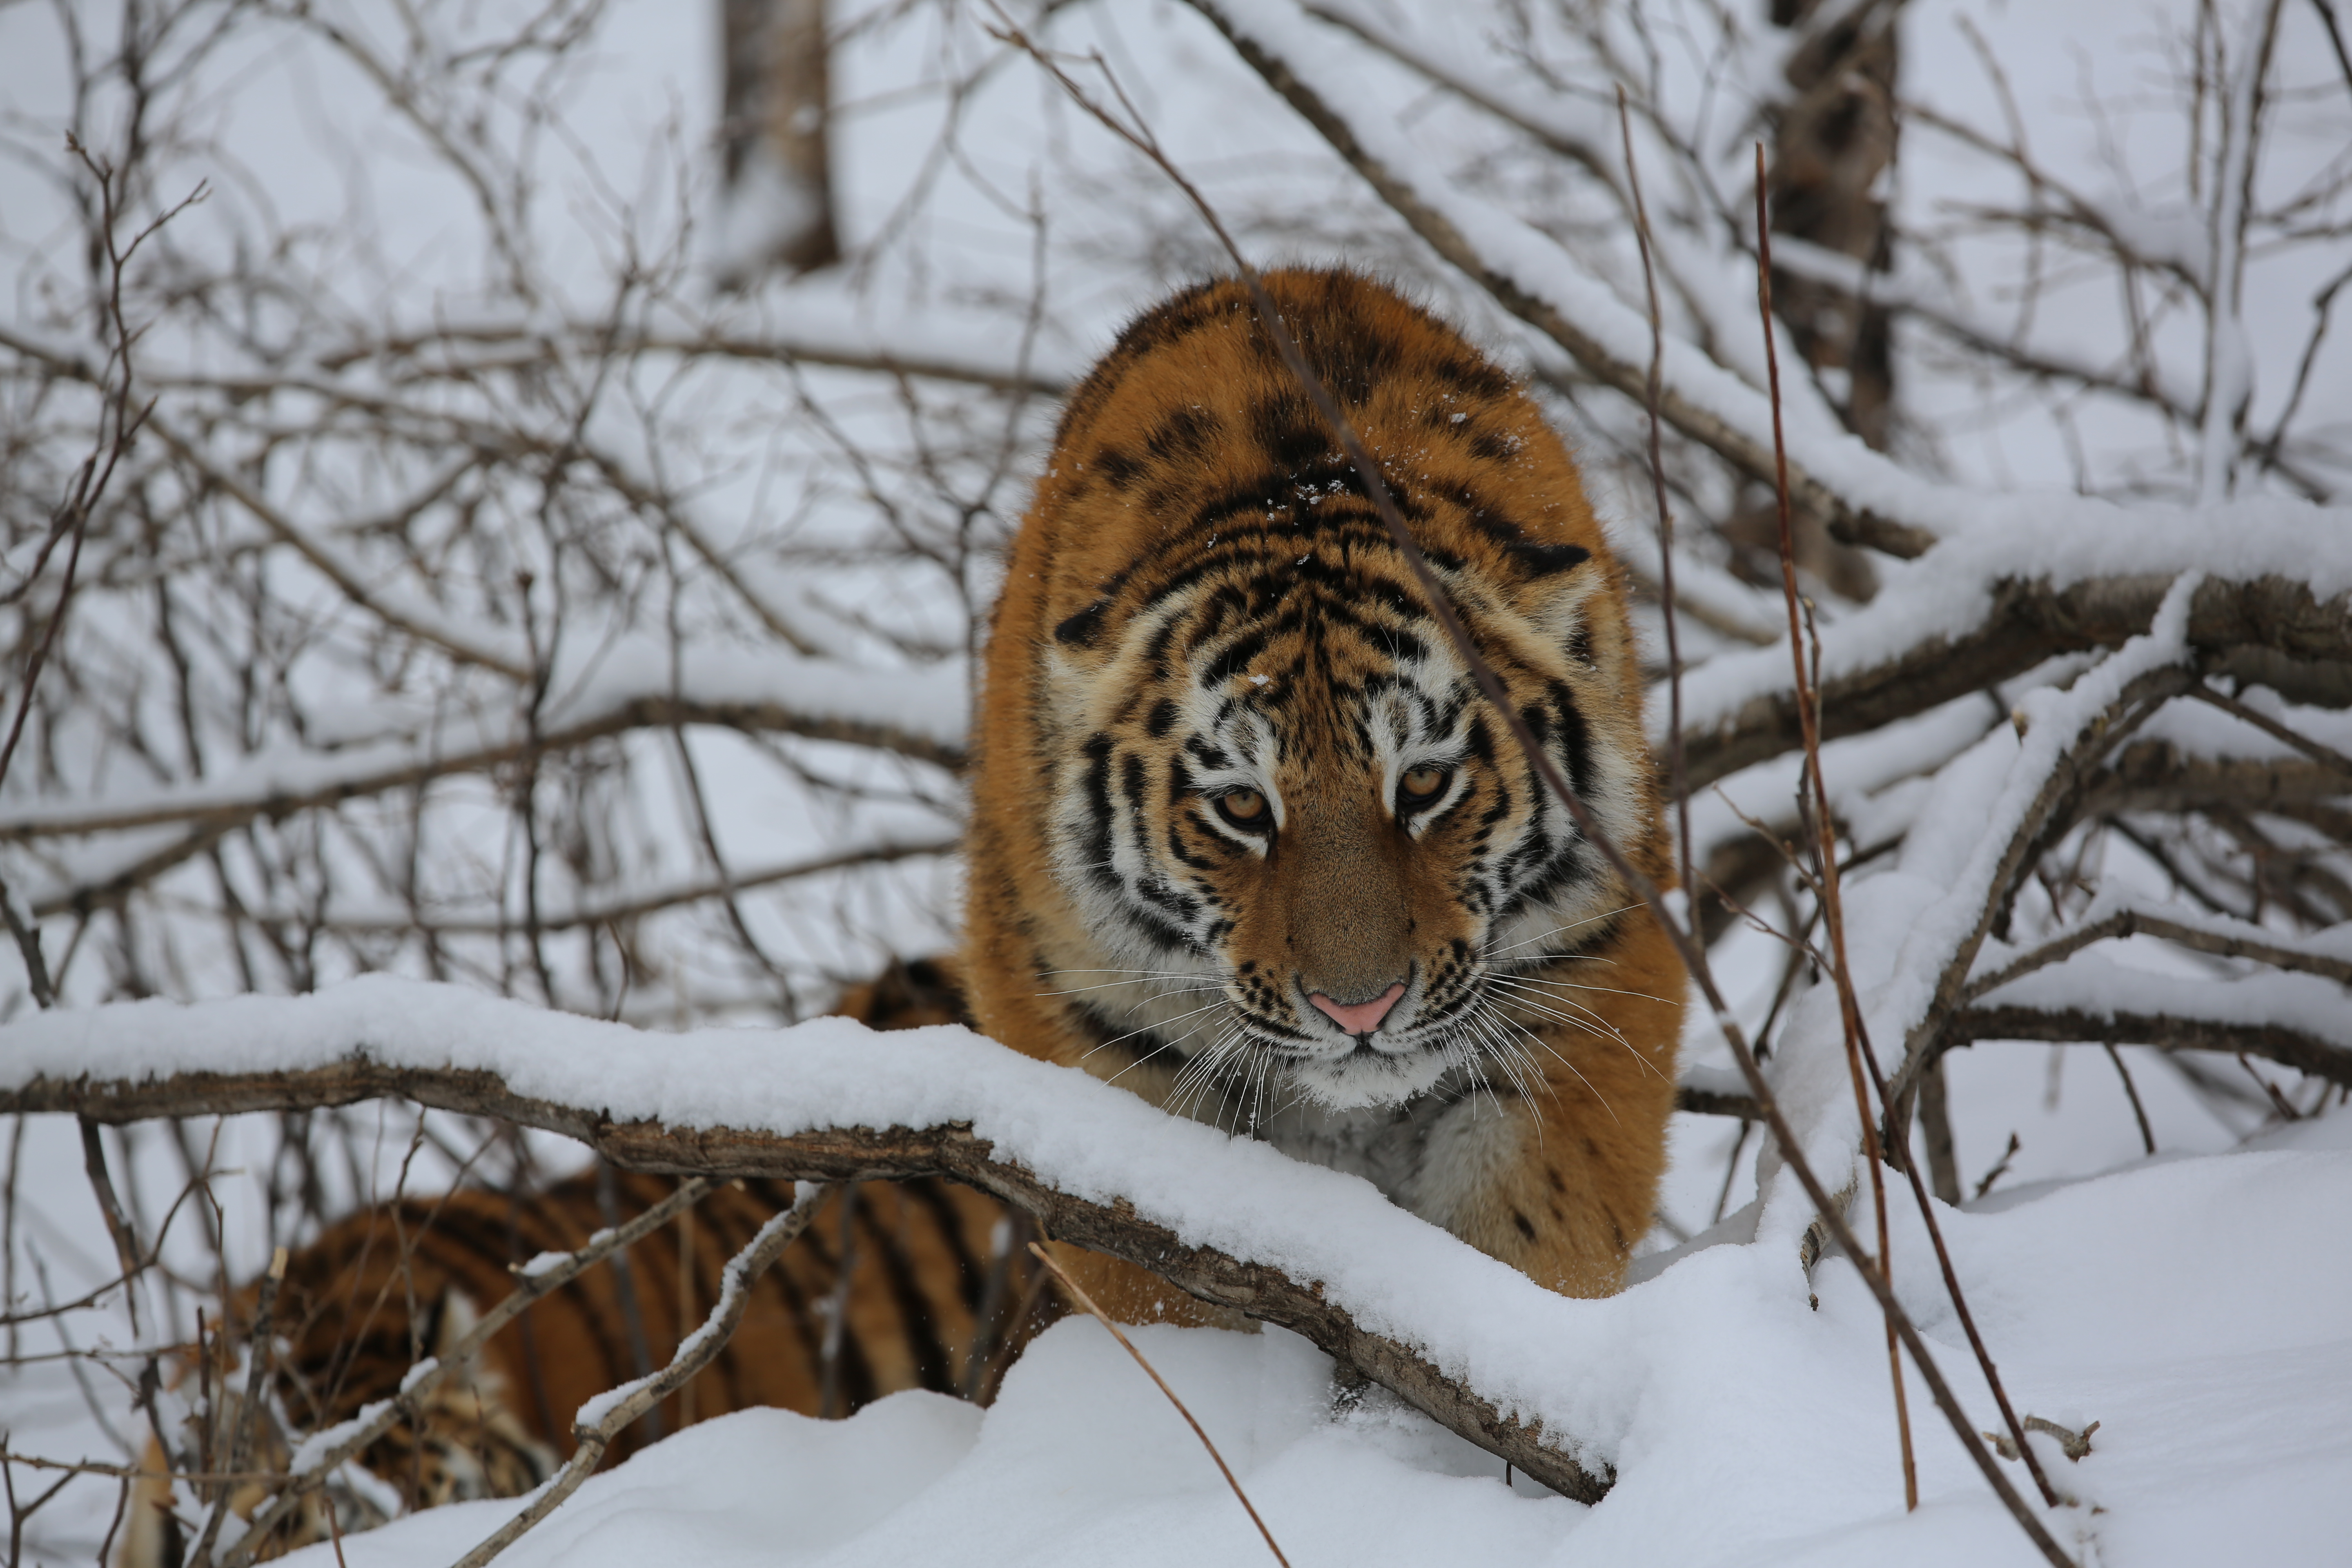 What ideas experts offer to improve the system of protection of the tiger?